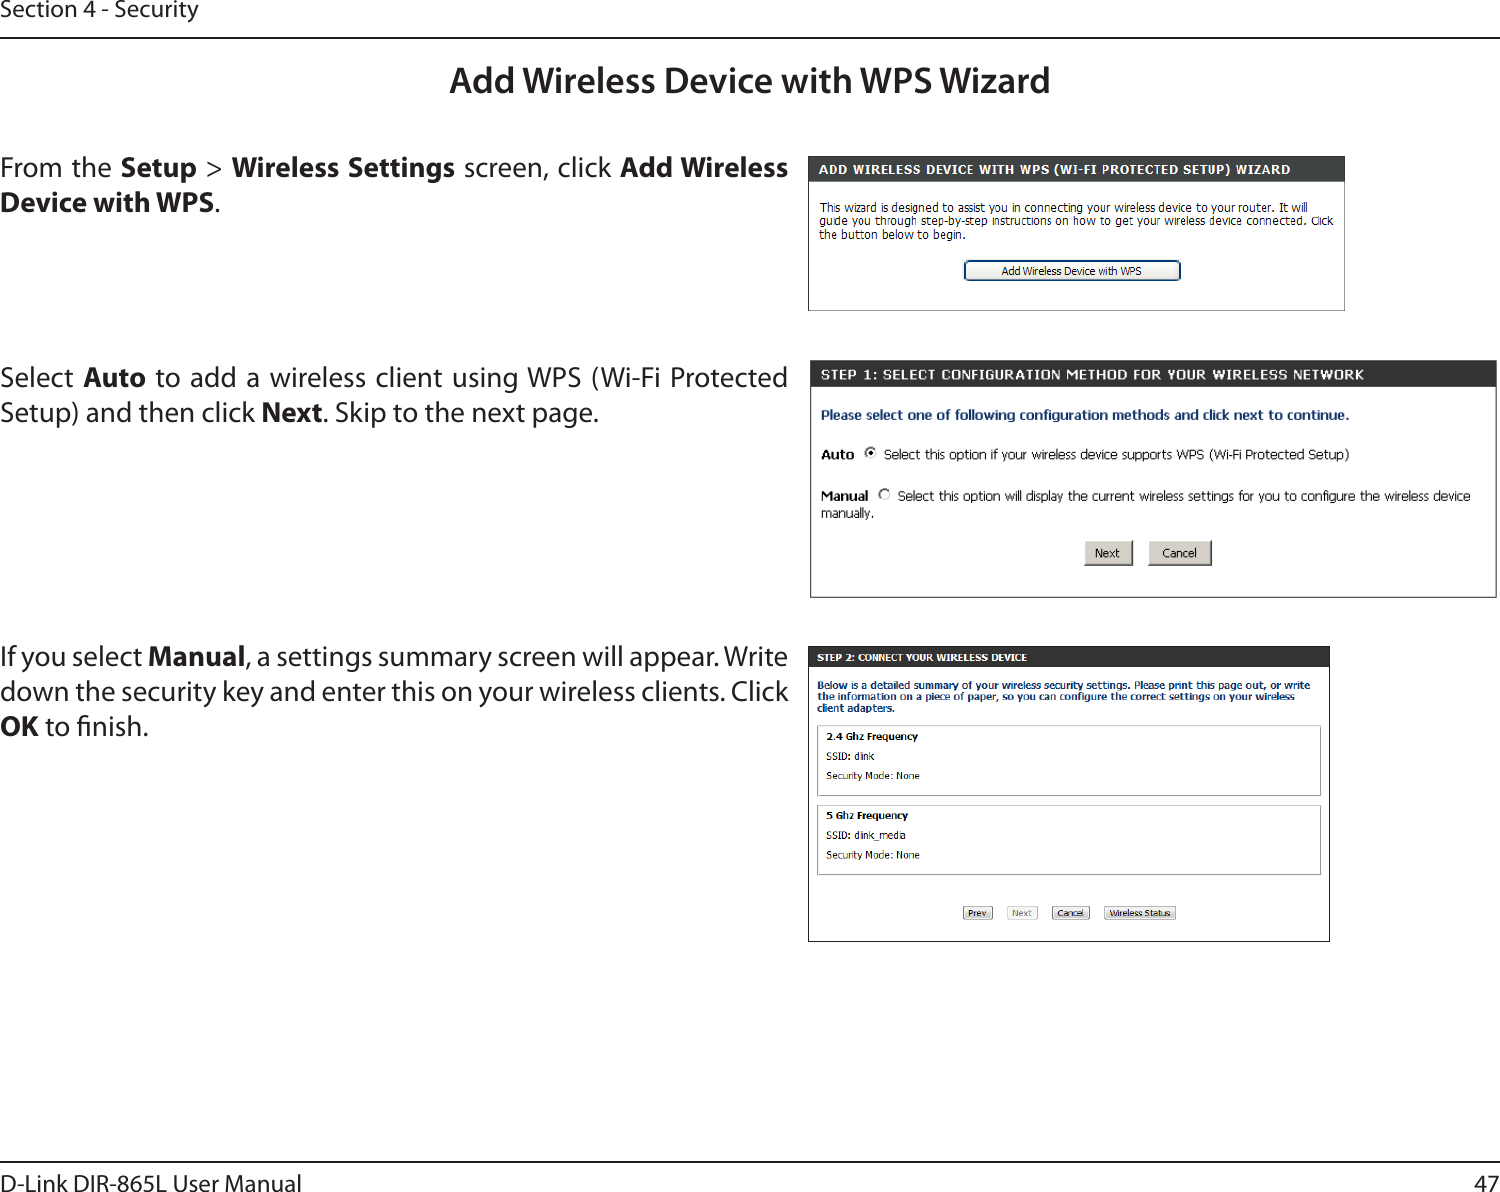 47D-Link DIR-865L User ManualSection 4 - SecurityFrom the Setup &gt; Wireless Settings screen, click Add Wireless Device with WPS.Add Wireless Device with WPS WizardIf you select Manual, a settings summary screen will appear. Write down the security key and enter this on your wireless clients. Click OK to nish.Select Auto to add a wireless client using WPS (Wi-Fi Protected Setup) and then click Next. Skip to the next page. 